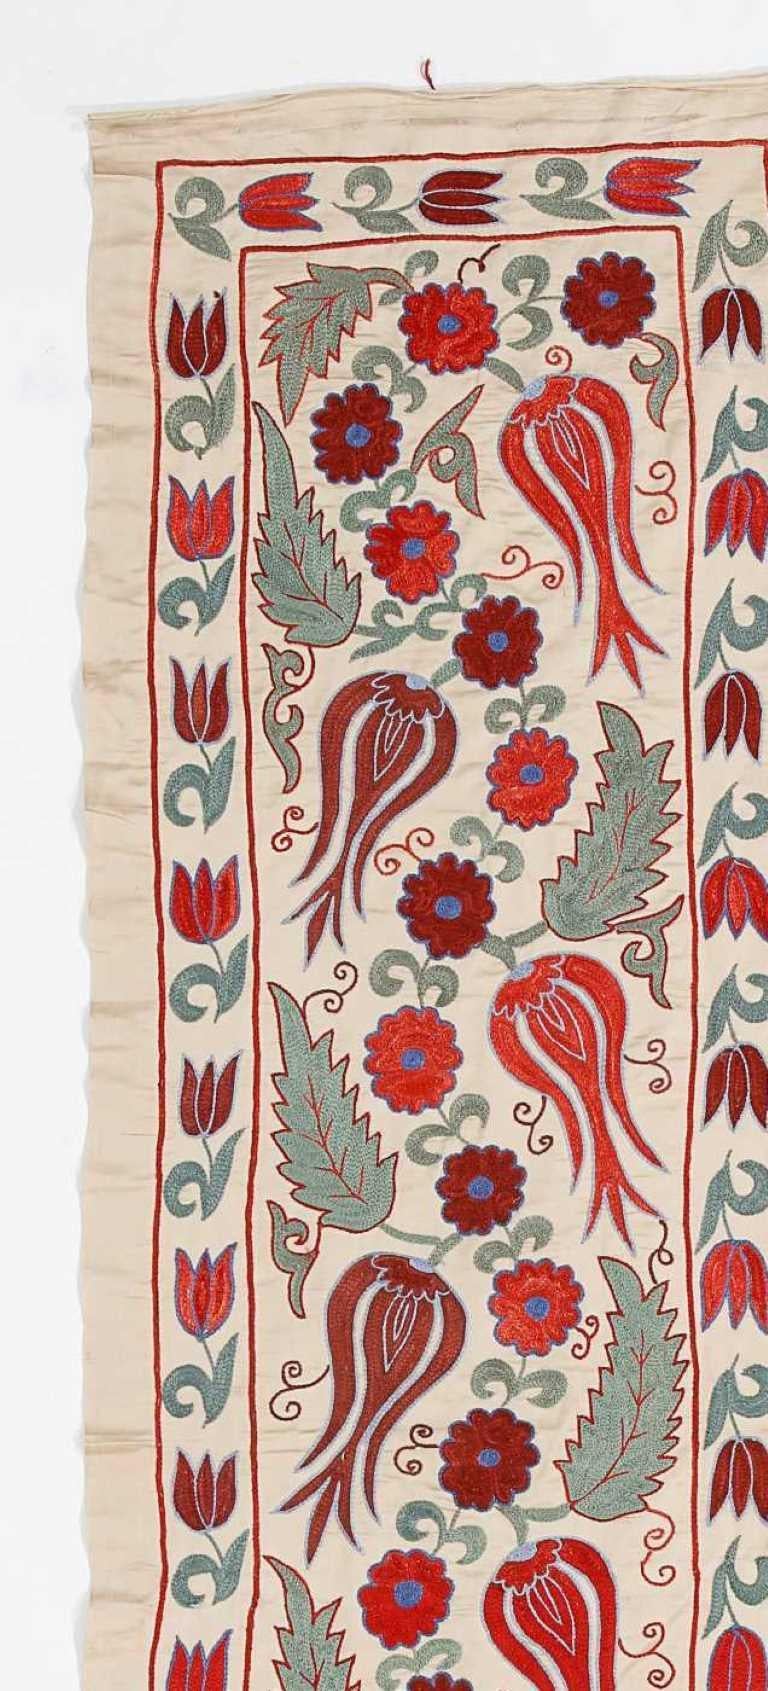 Uzbek Central Asian Suzani Textile, Embroidered Cotton and Silk Bed Cover